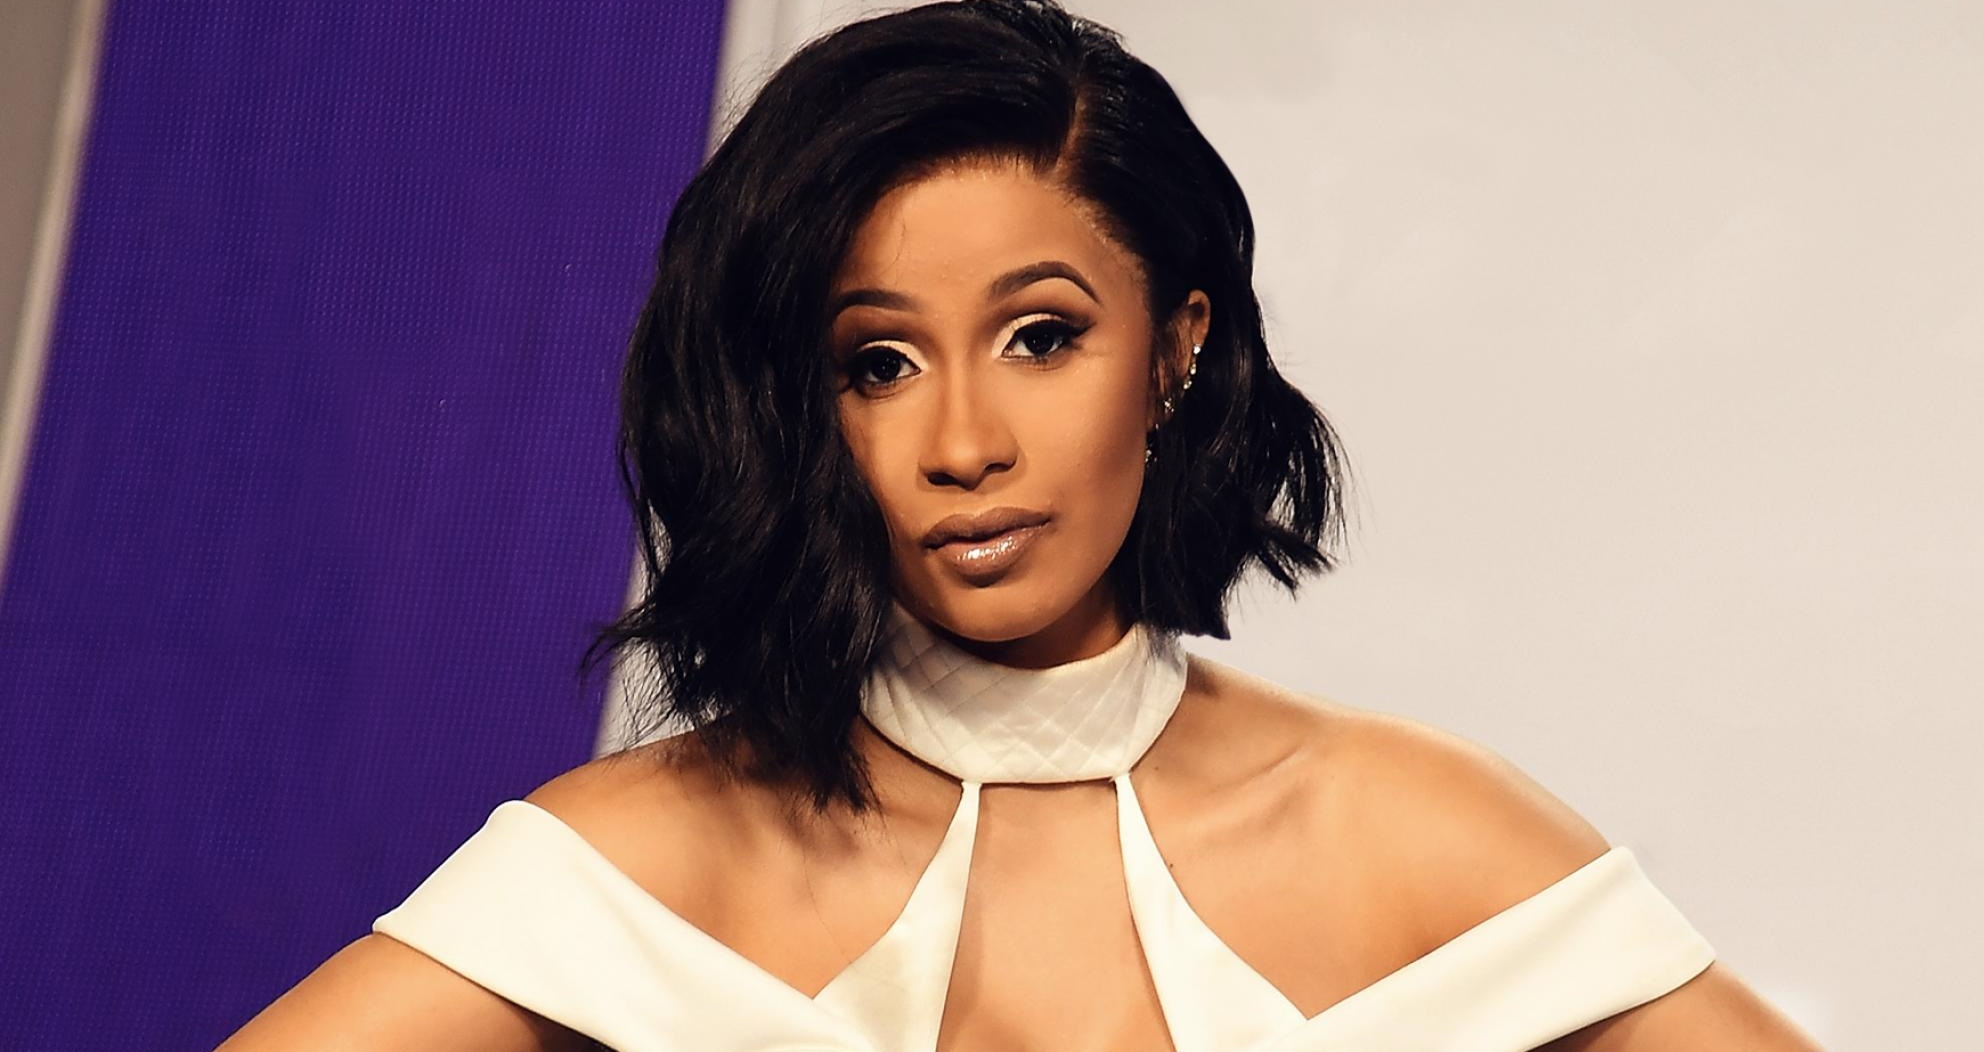 Are You Here For It? Cardi B Set To Launch Her Own Beauty Line ‘Bardi Beauty’